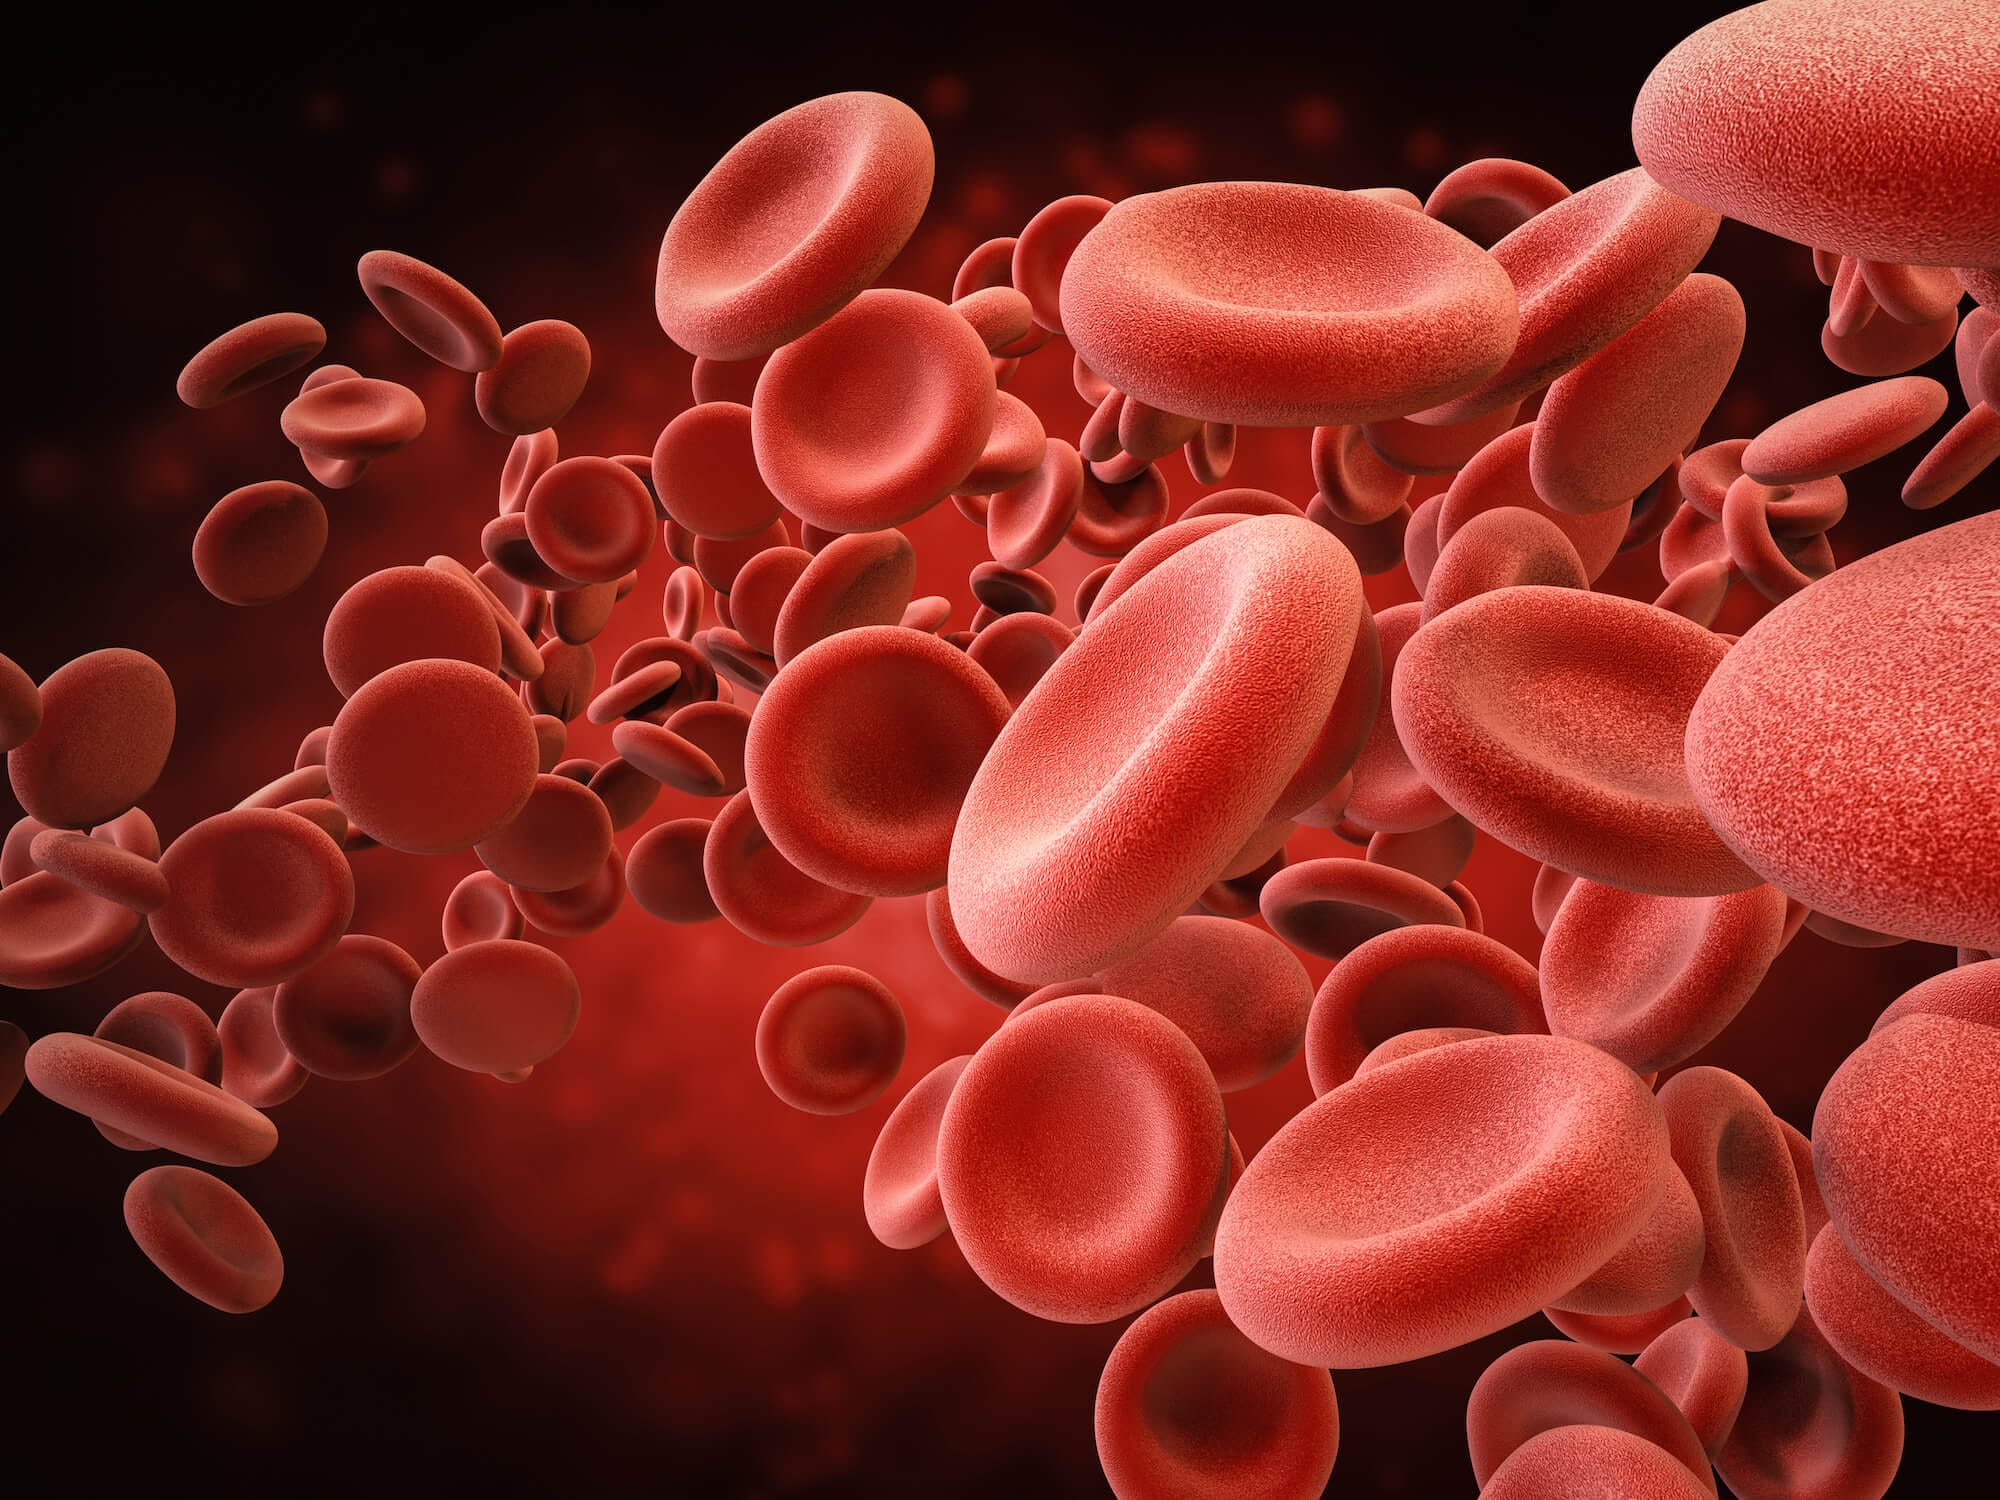 A 3D rendering of red blood cells inside a vein.